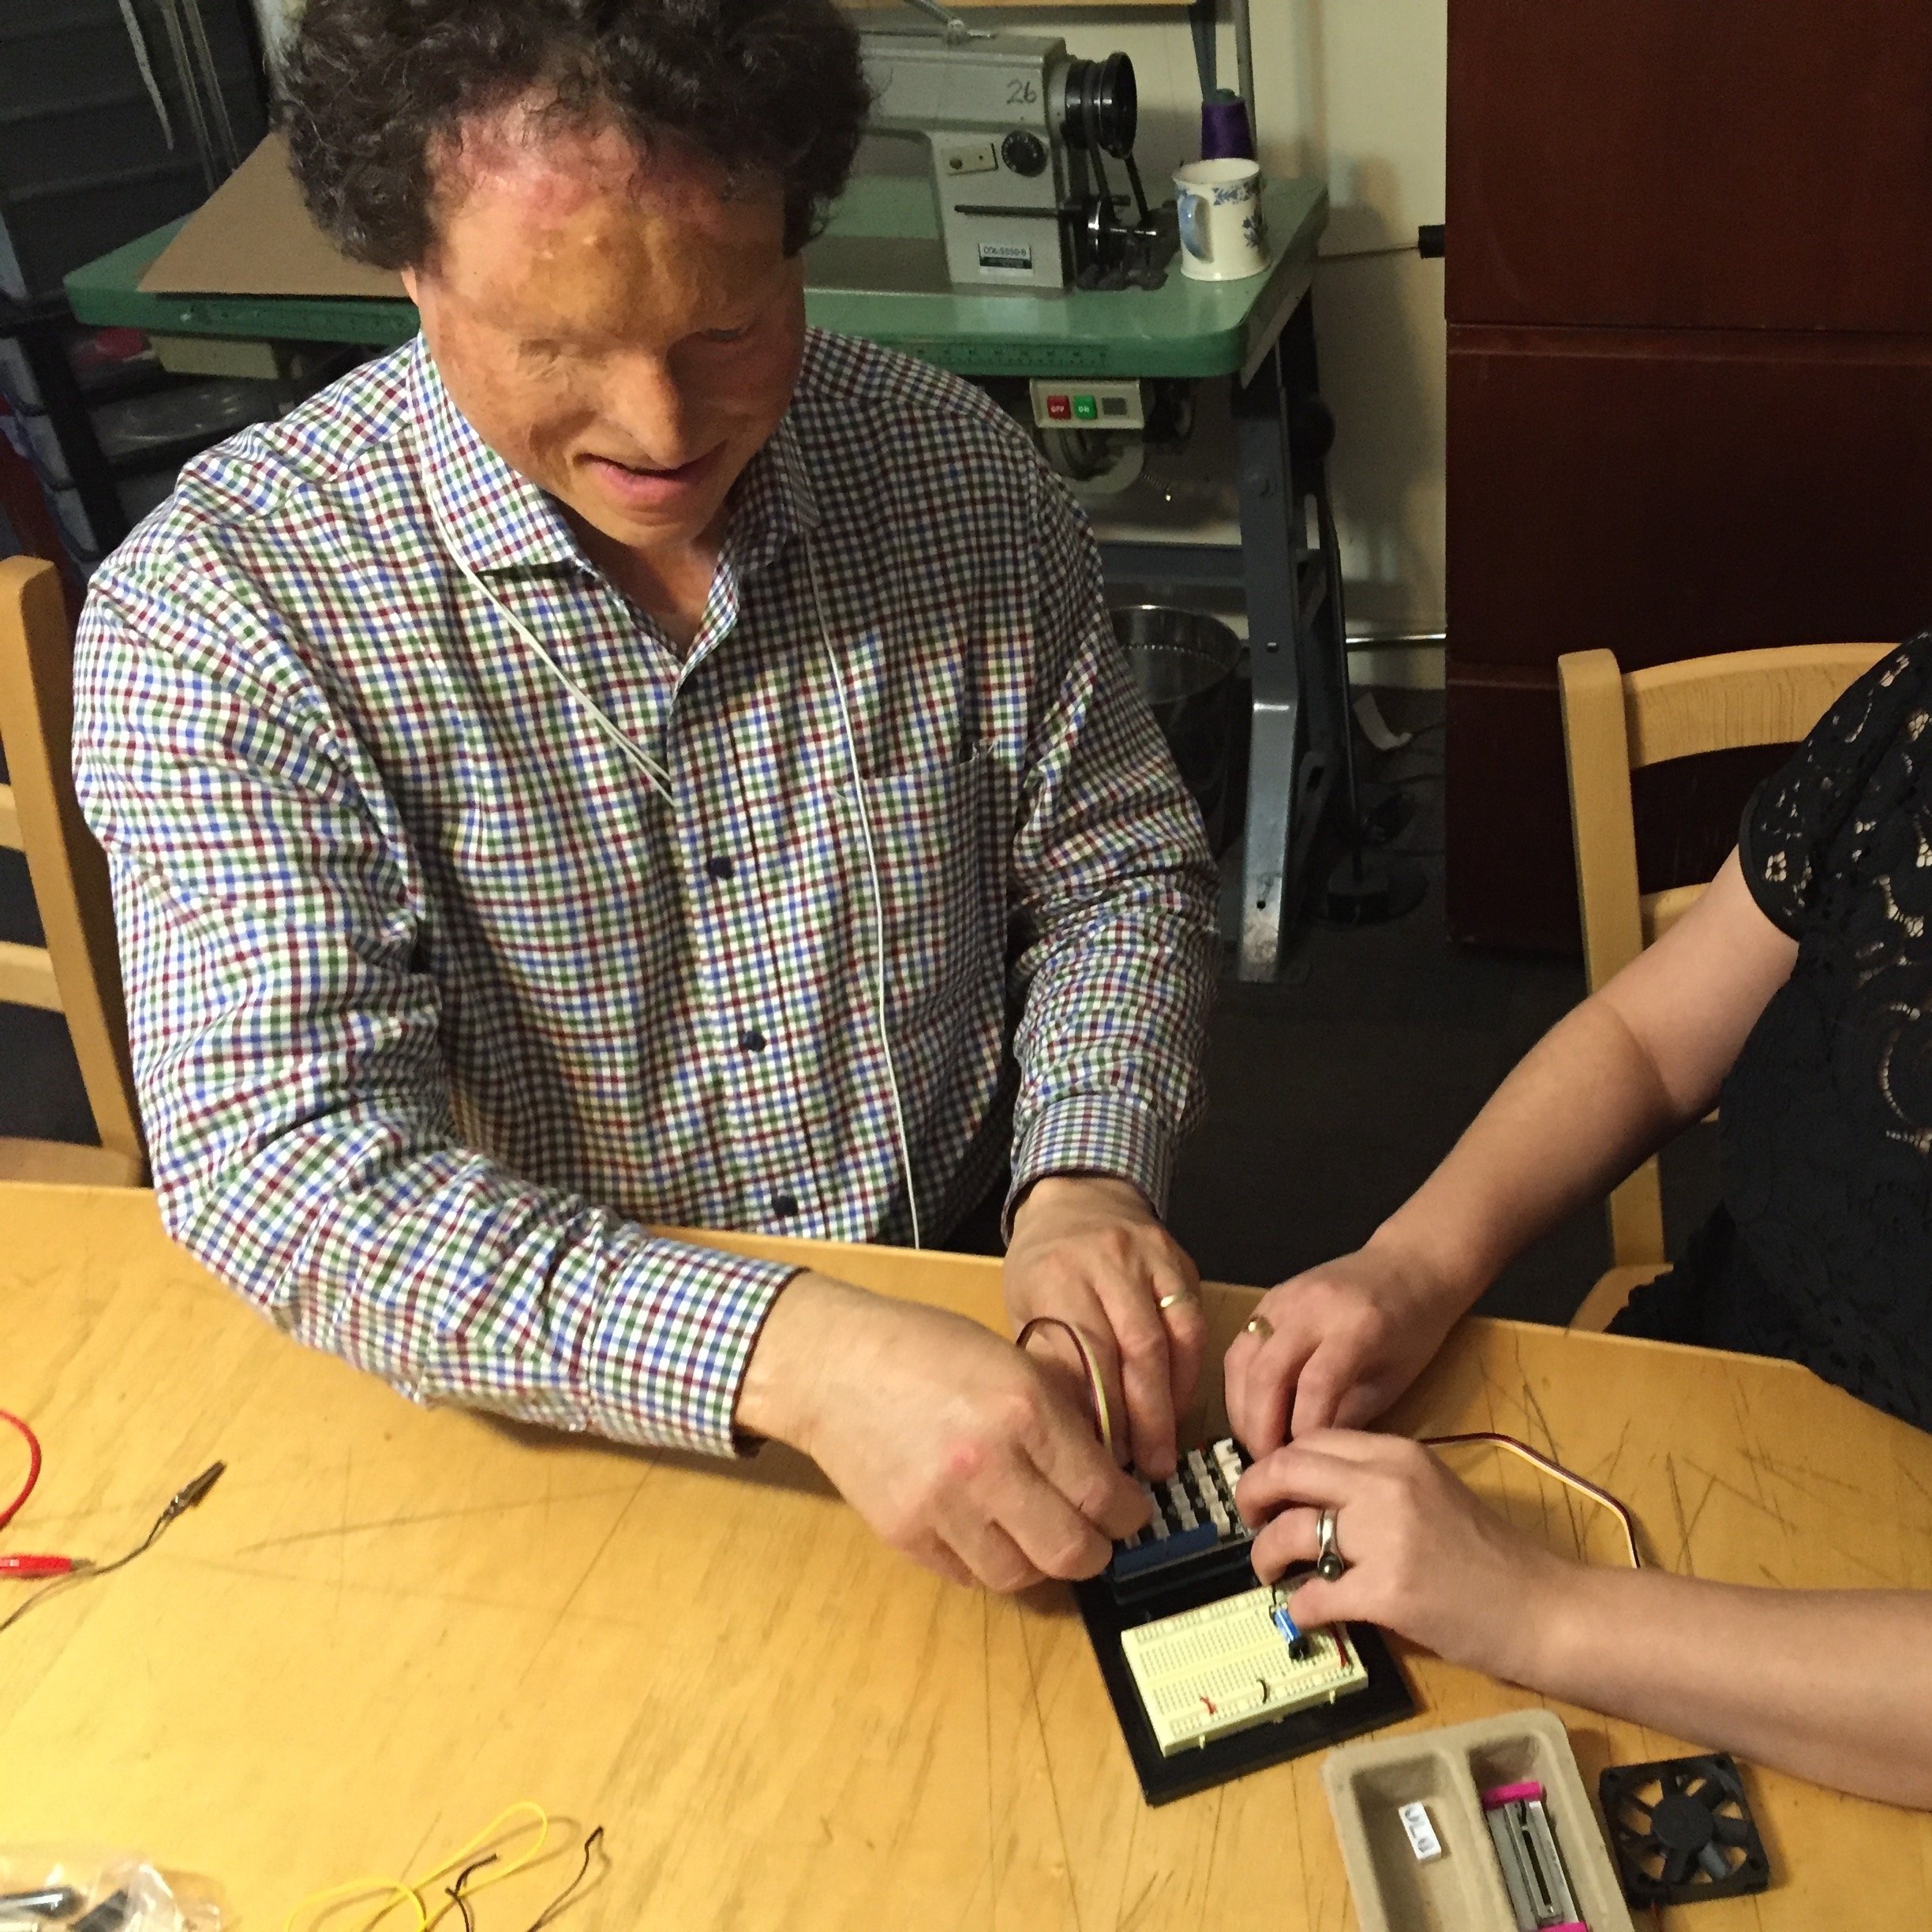 Man with visual impairment works with a woman to use Arduino